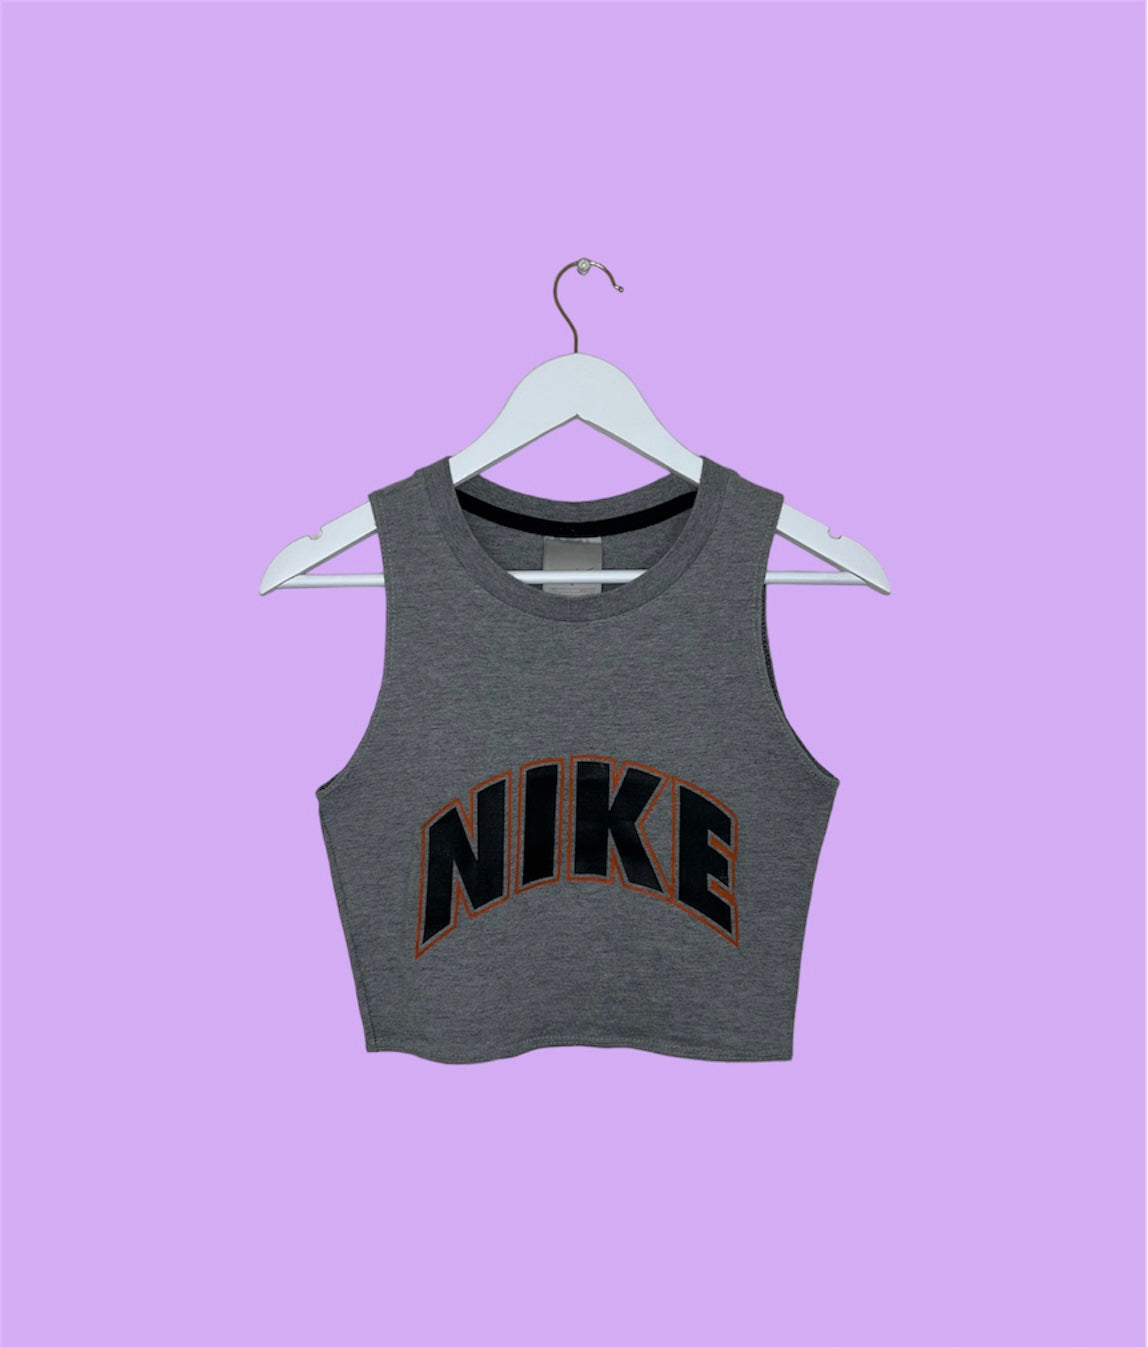 grey sleeveless crop top with orange and black nike logo shown on a lilac background